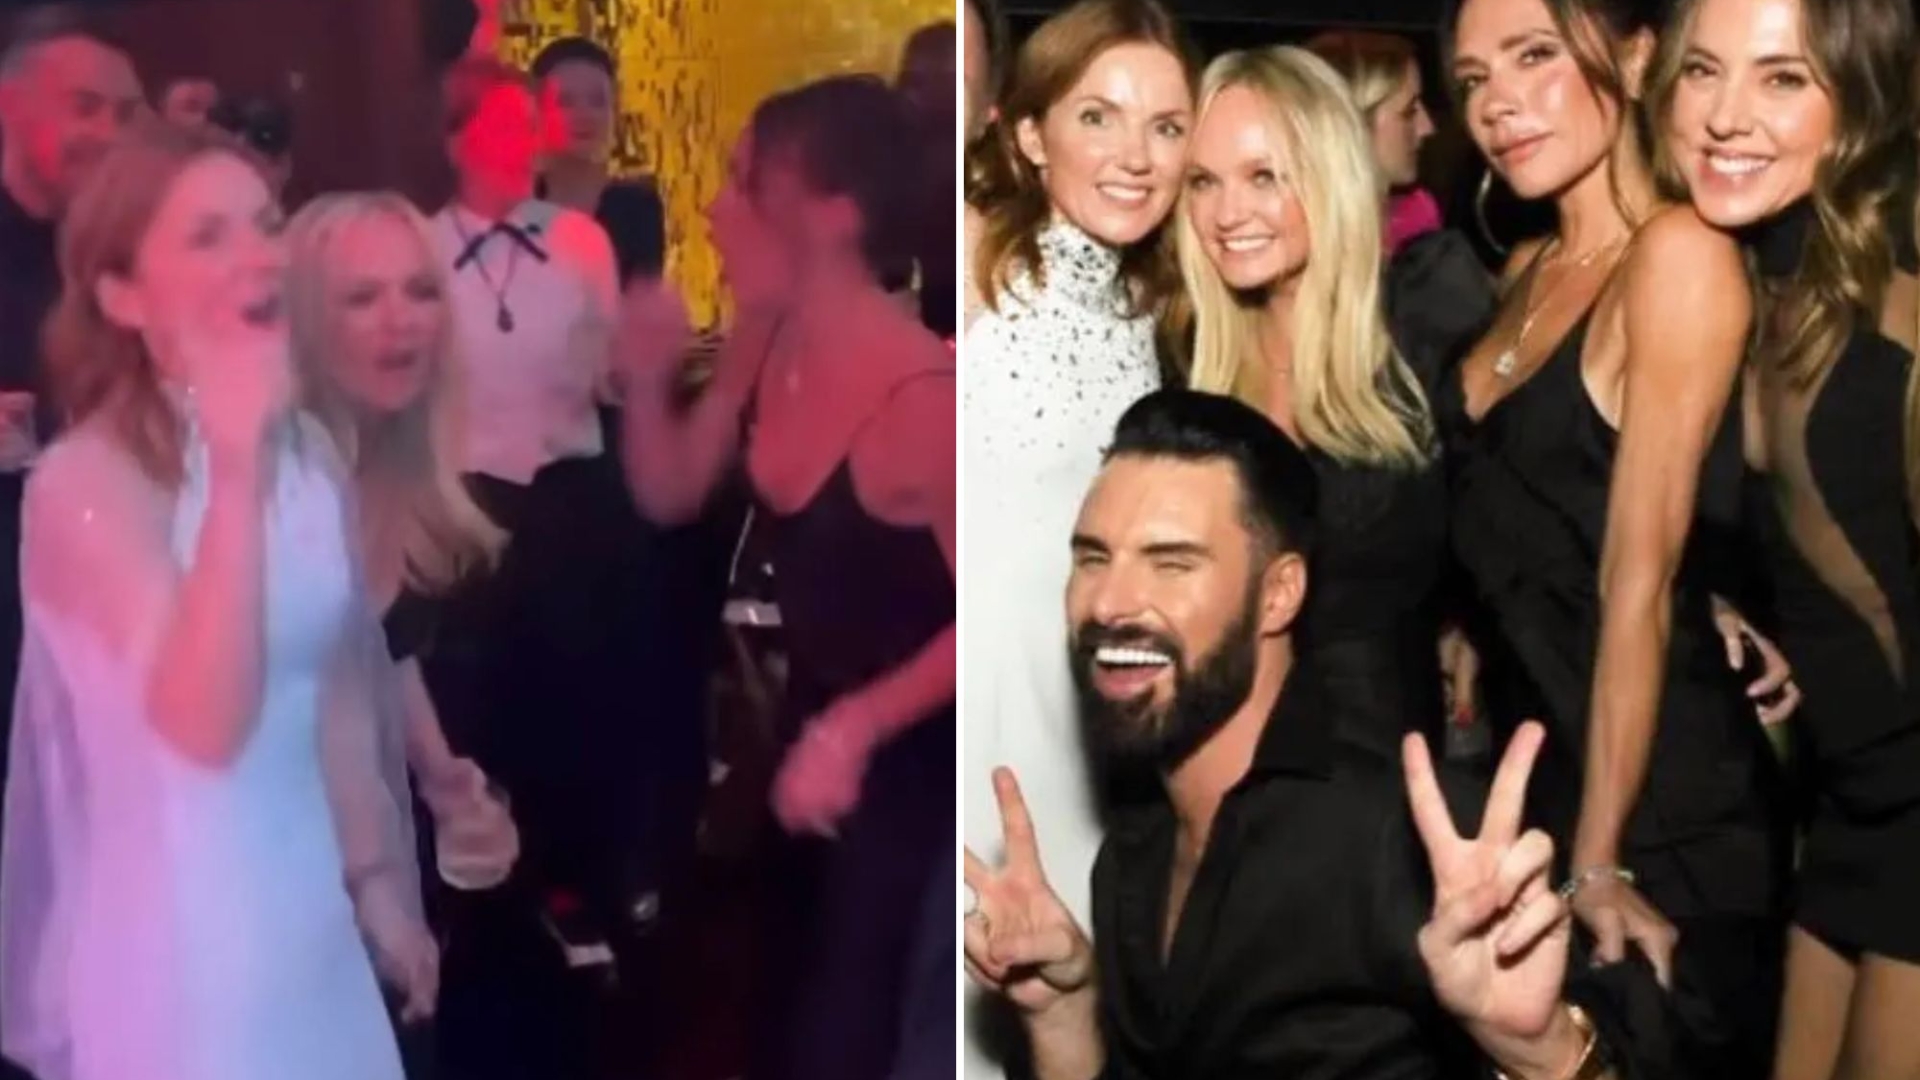 Victoria Beckham sings Spice Girls as she’s reunited with bandmates at Geri Horner’s 50th birthday party